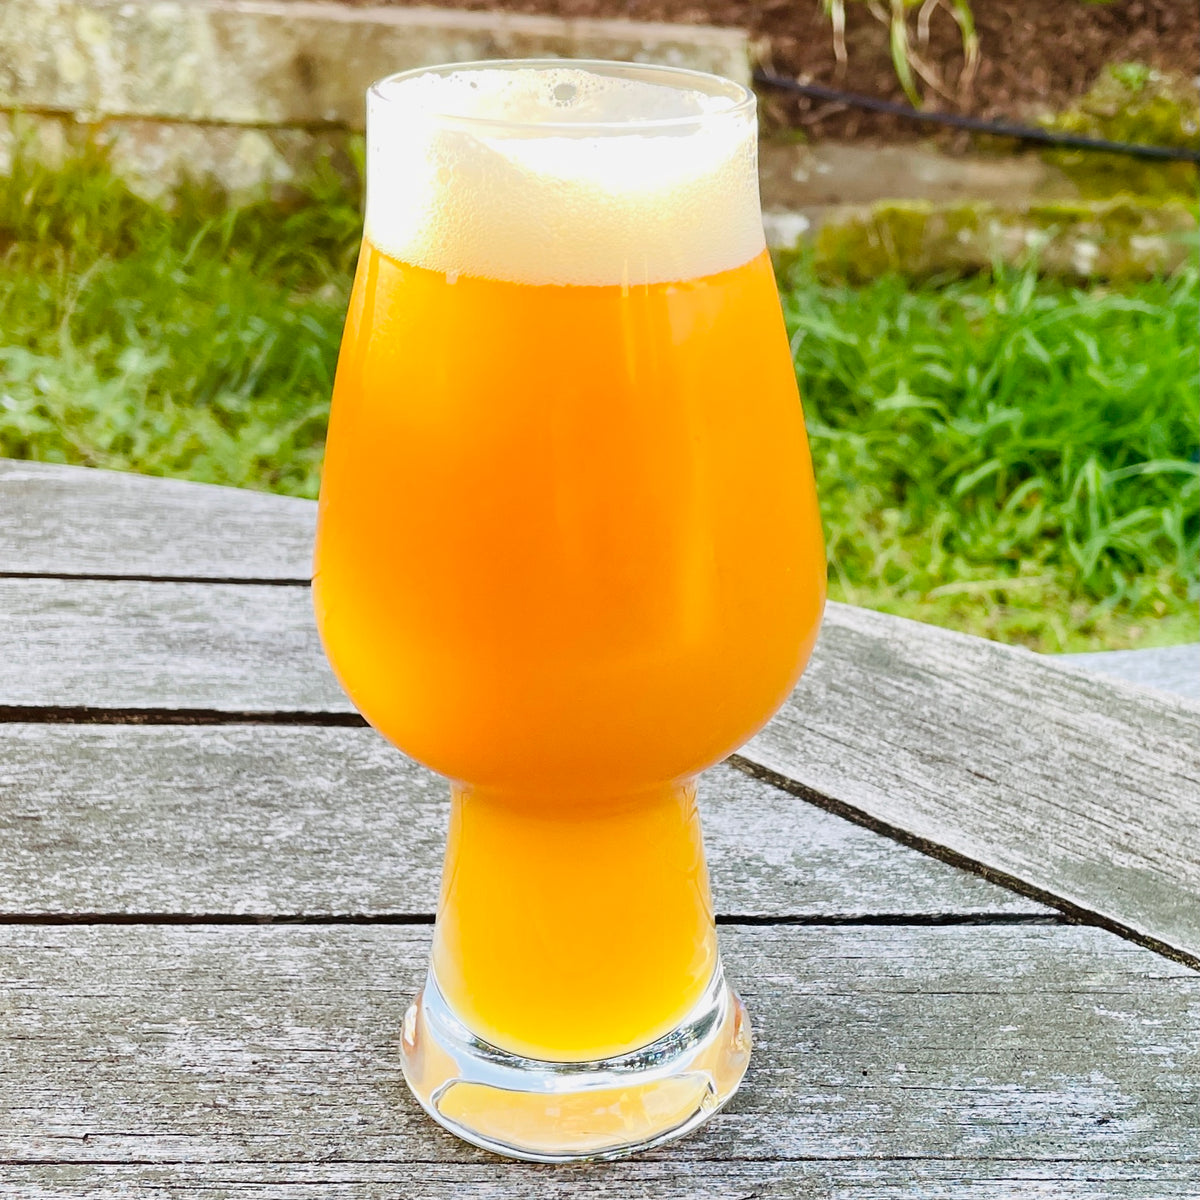 ATF Wicked Weed (IIPA) - Grainfather | Brewzilla | Guten - All Things Fermented | Home Brew Shop NZ | Supplies | Equipment